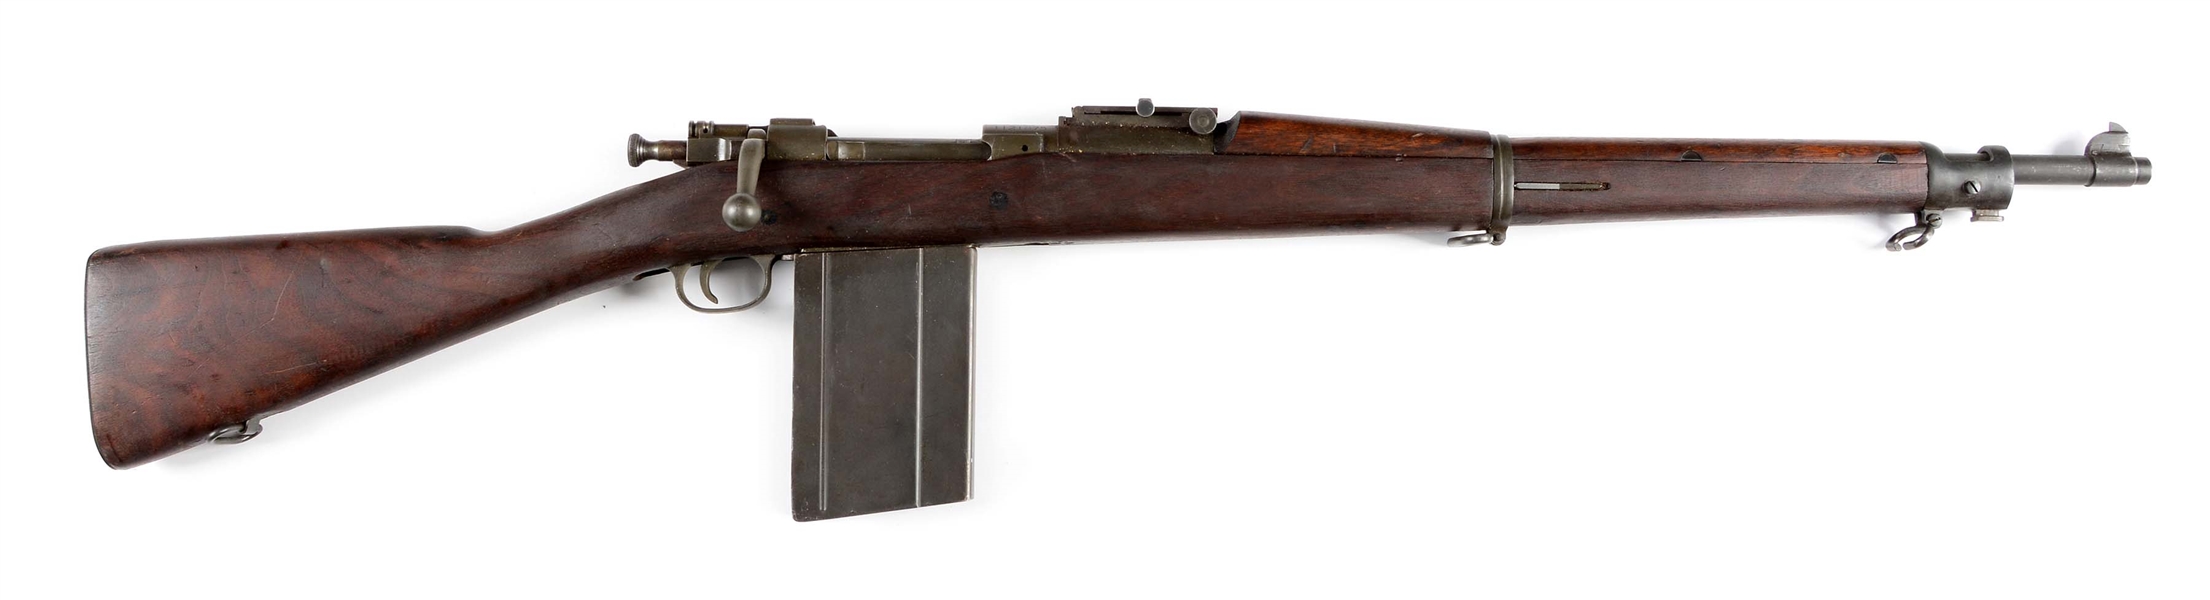 (C) U.S. SPRINGFIELD ARMORY MODEL 1903 MK I RIFLE WITH EXTENDED MAGAZINE (1919).